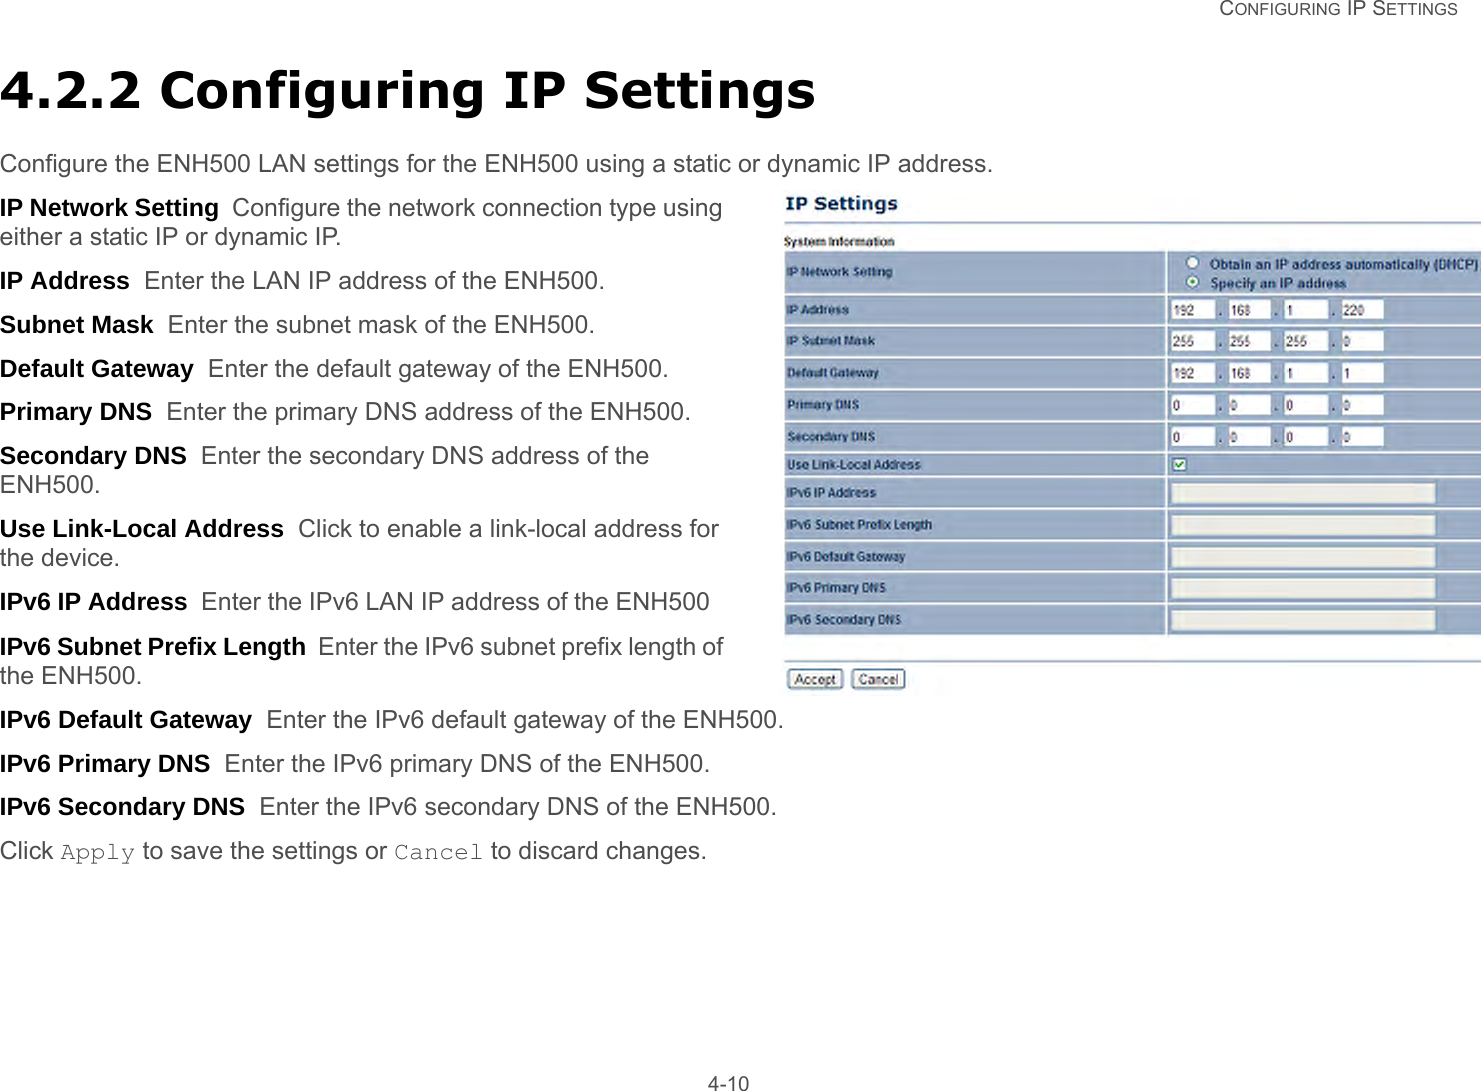   CONFIGURING IP SETTINGS 4-104.2.2 Configuring IP SettingsConfigure the ENH500 LAN settings for the ENH500 using a static or dynamic IP address.IP Network Setting  Configure the network connection type using either a static IP or dynamic IP.IP Address  Enter the LAN IP address of the ENH500.Subnet Mask  Enter the subnet mask of the ENH500.Default Gateway  Enter the default gateway of the ENH500.Primary DNS  Enter the primary DNS address of the ENH500.Secondary DNS  Enter the secondary DNS address of the ENH500.Use Link-Local Address  Click to enable a link-local address for the device.IPv6 IP Address  Enter the IPv6 LAN IP address of the ENH500 IPv6 Subnet Prefix Length  Enter the IPv6 subnet prefix length of the ENH500.IPv6 Default Gateway  Enter the IPv6 default gateway of the ENH500.IPv6 Primary DNS  Enter the IPv6 primary DNS of the ENH500.IPv6 Secondary DNS  Enter the IPv6 secondary DNS of the ENH500.Click Apply to save the settings or Cancel to discard changes.